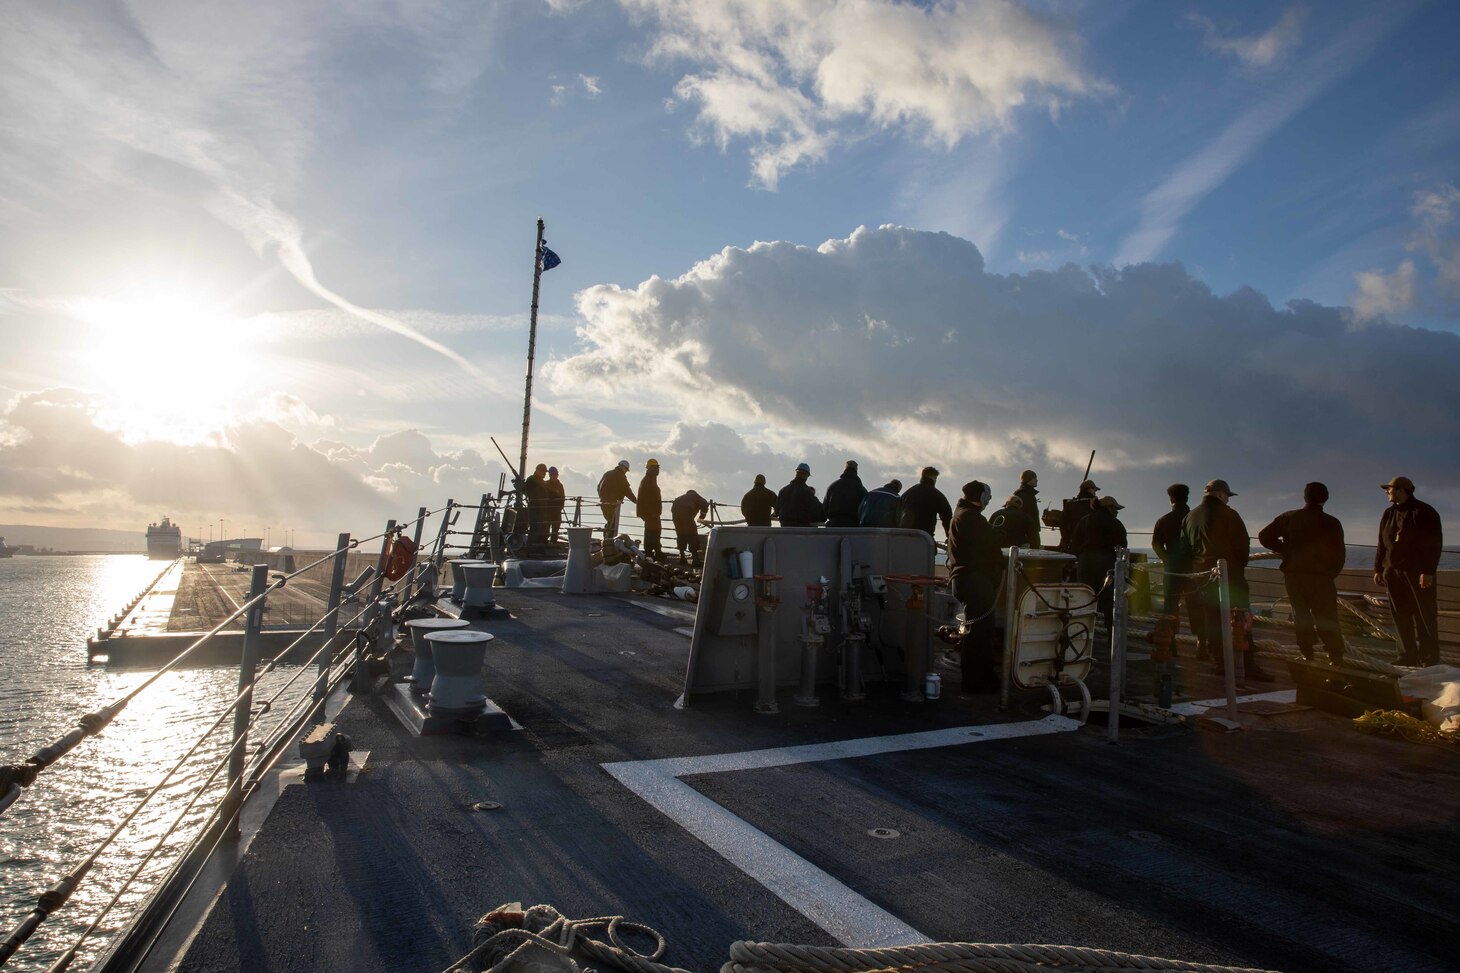 (Dec. 29, 2022) Sailors assigned to the ArleighBurke-class guided-missile destroyer USS Nitze (DDG 94) heave line as the ship arrives in Civitavecchia, Italy for a scheduled port visit, Dec. 29, 2022. The George H.W. Bush Carrier Strike Group is on a scheduled deployment in the U.S. Naval Forces Europe area of operations, employed by U.S. Sixth Fleet to defend U.S., allied, and partner interests.